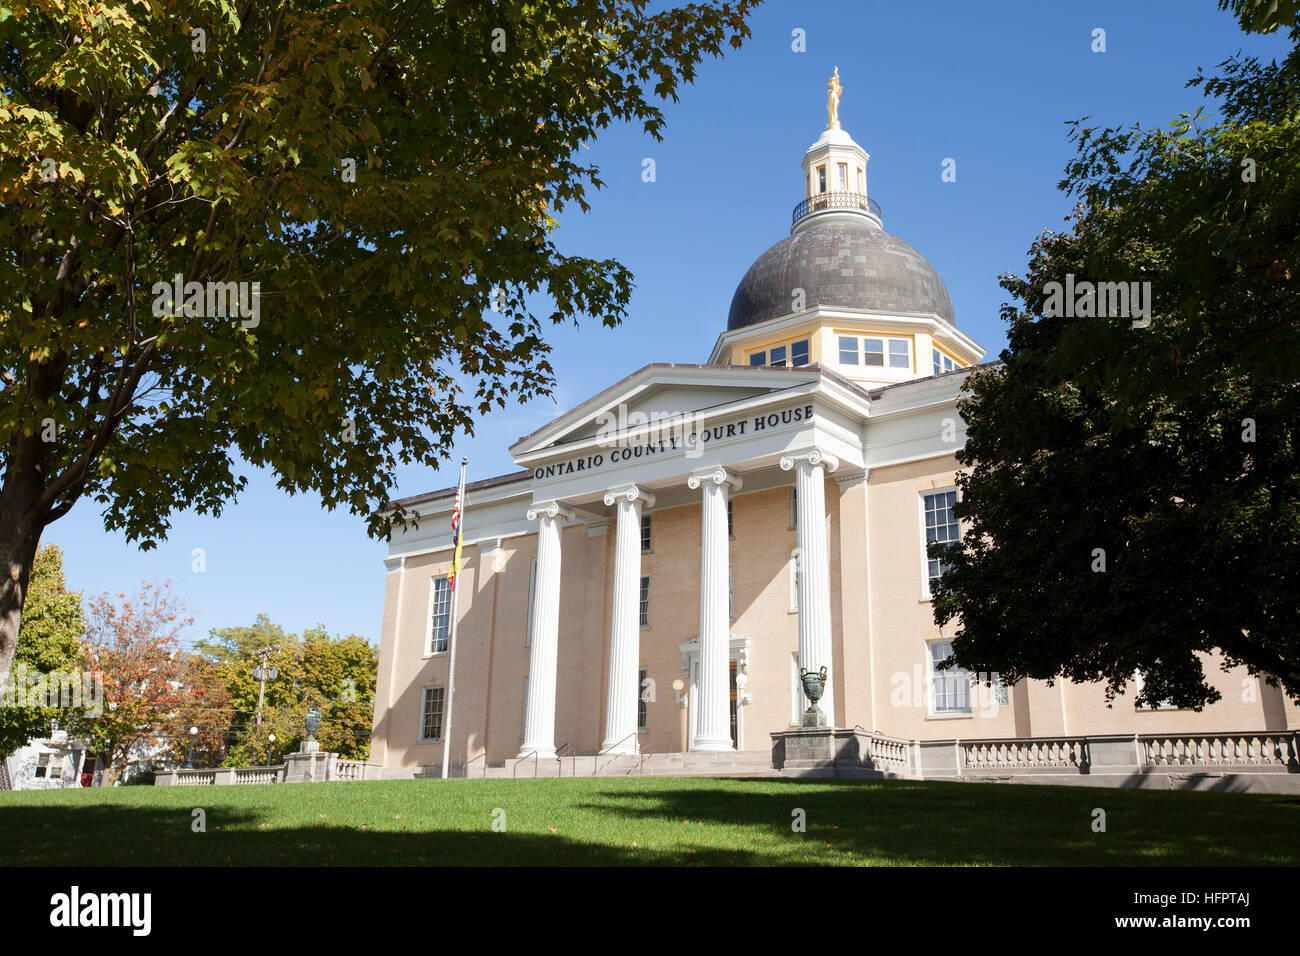 CANANDAIGUA, NEW YORK - 11. Oktober 2016: The Ontario County Courthouse in Canandaigua im US-Bundesstaat New York befindet. Stockfoto